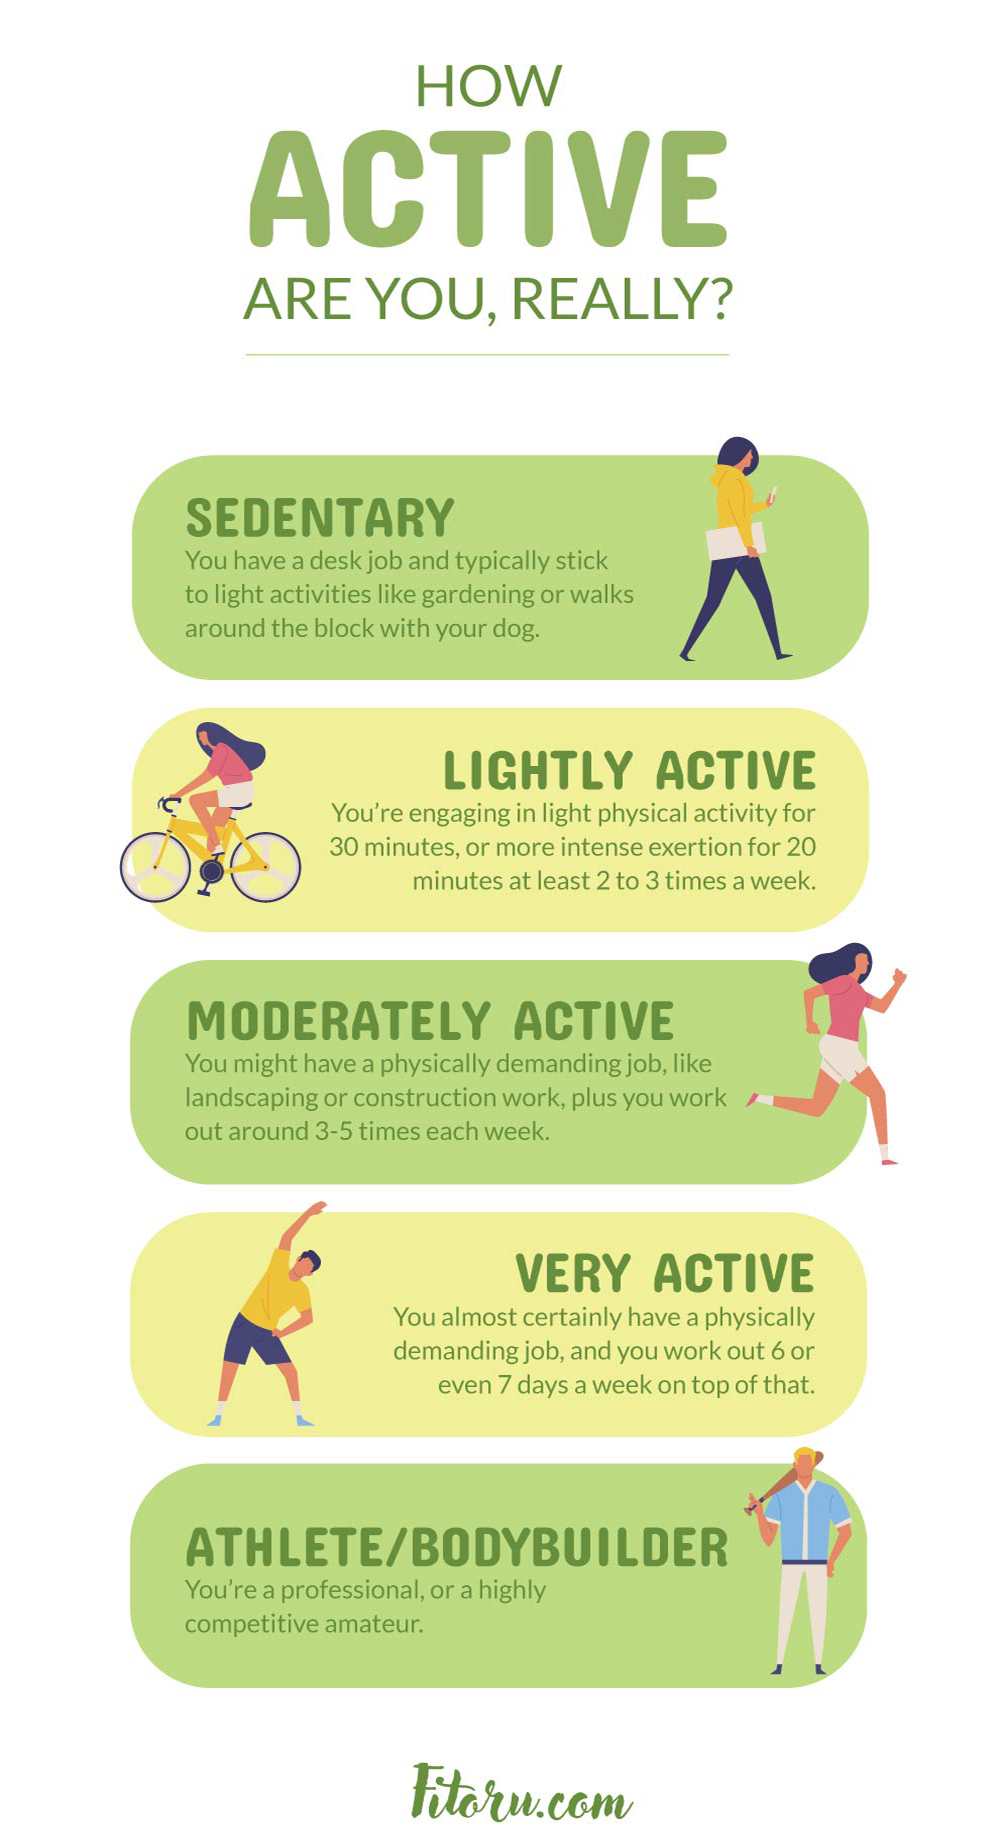 Are you really as active as you think you are? Here are some specifics to help you find out which category you fall into.